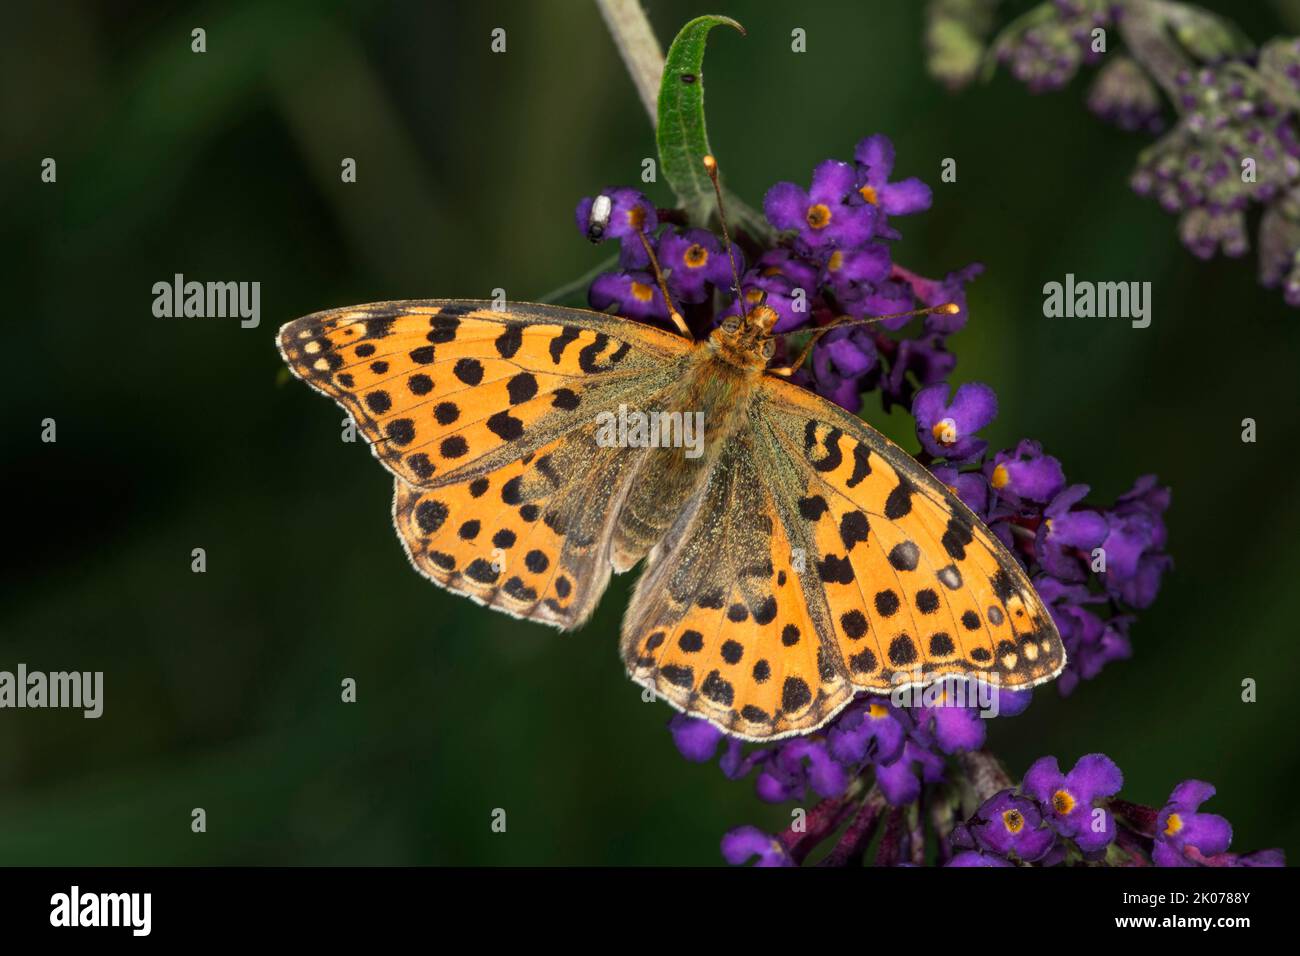 Queen of spain fritillary (Issoria lathonia) on butterfly bush (Buddleia), Baden-Wuerttemberg, Germany Stock Photo